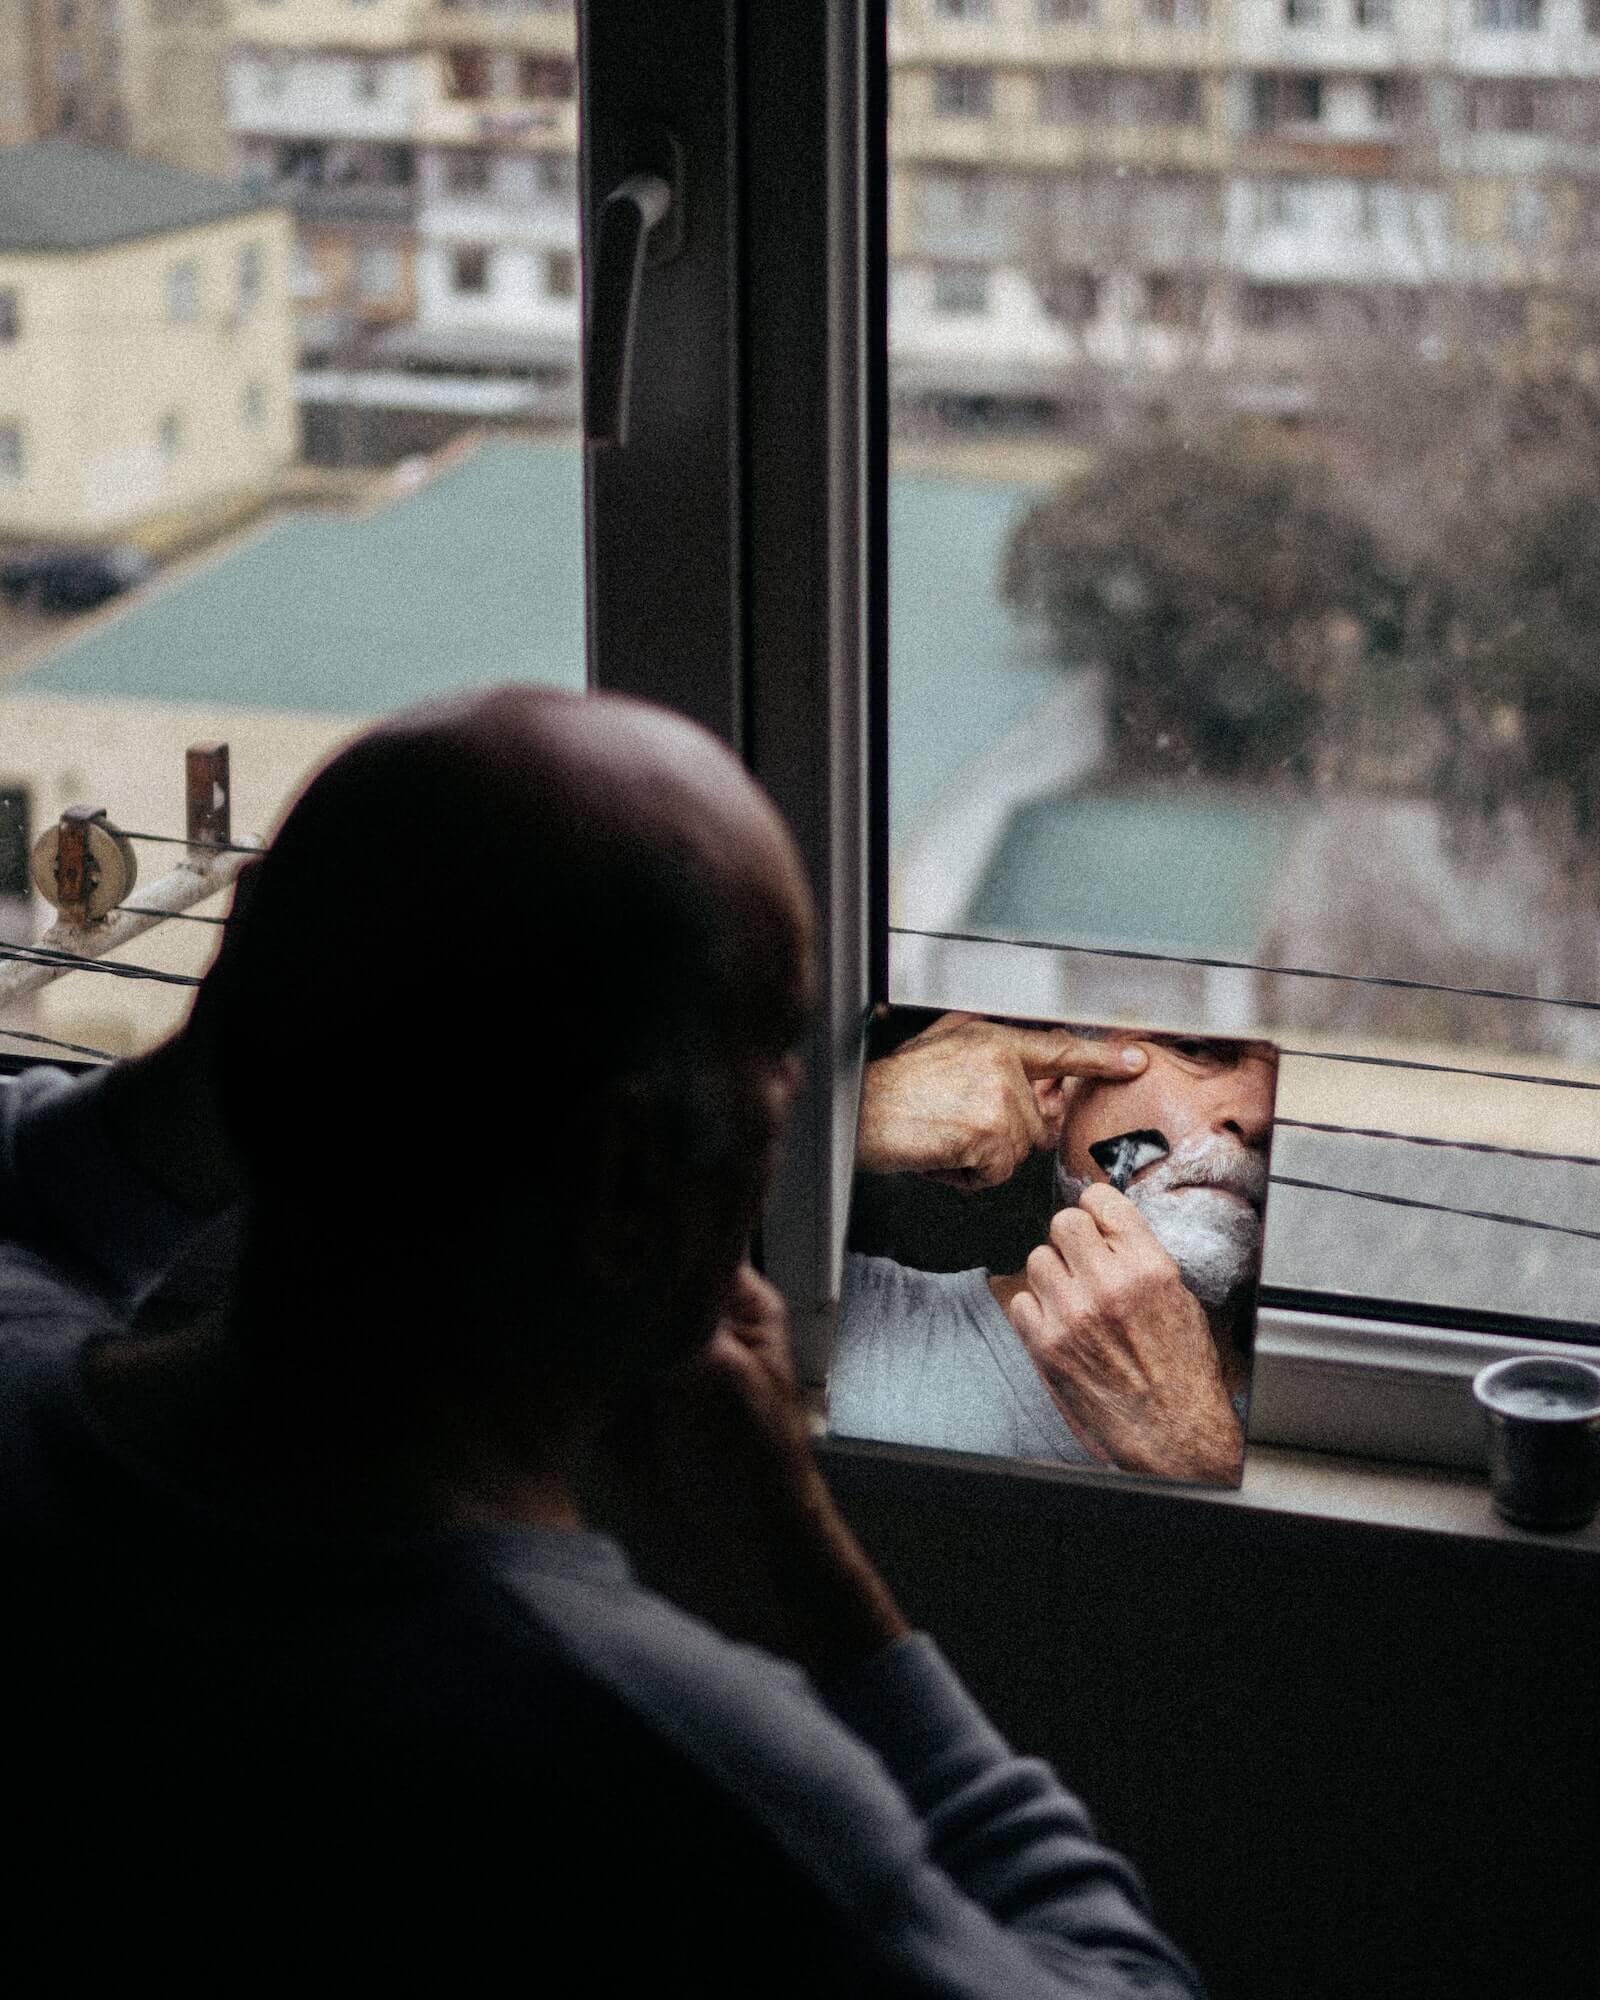 Man shaving his face in a small mirror in front of window